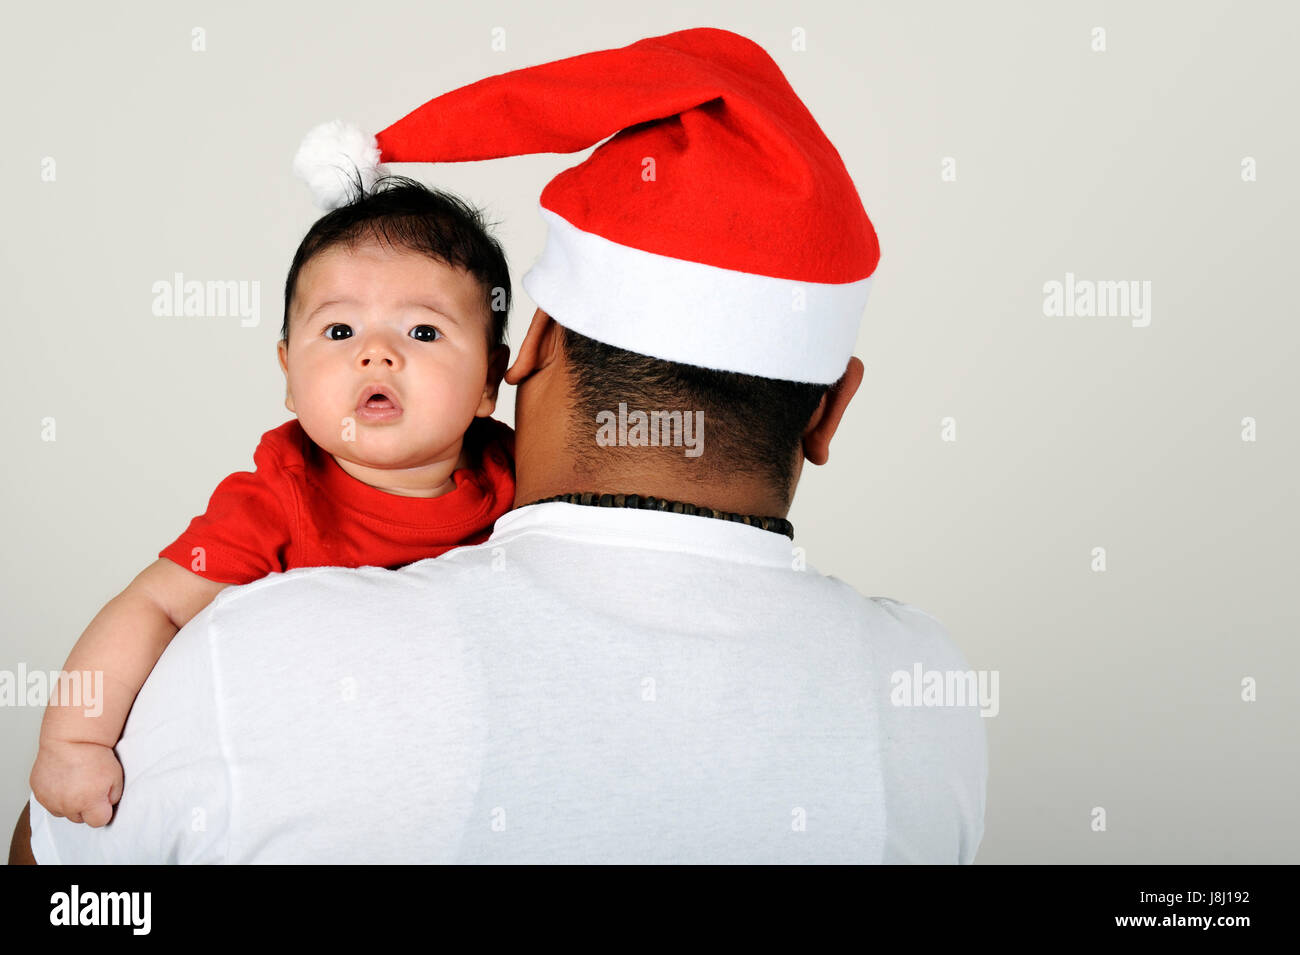 son, father christmas, look, glancing, see, view, looking, peeking, looking at, Stock Photo